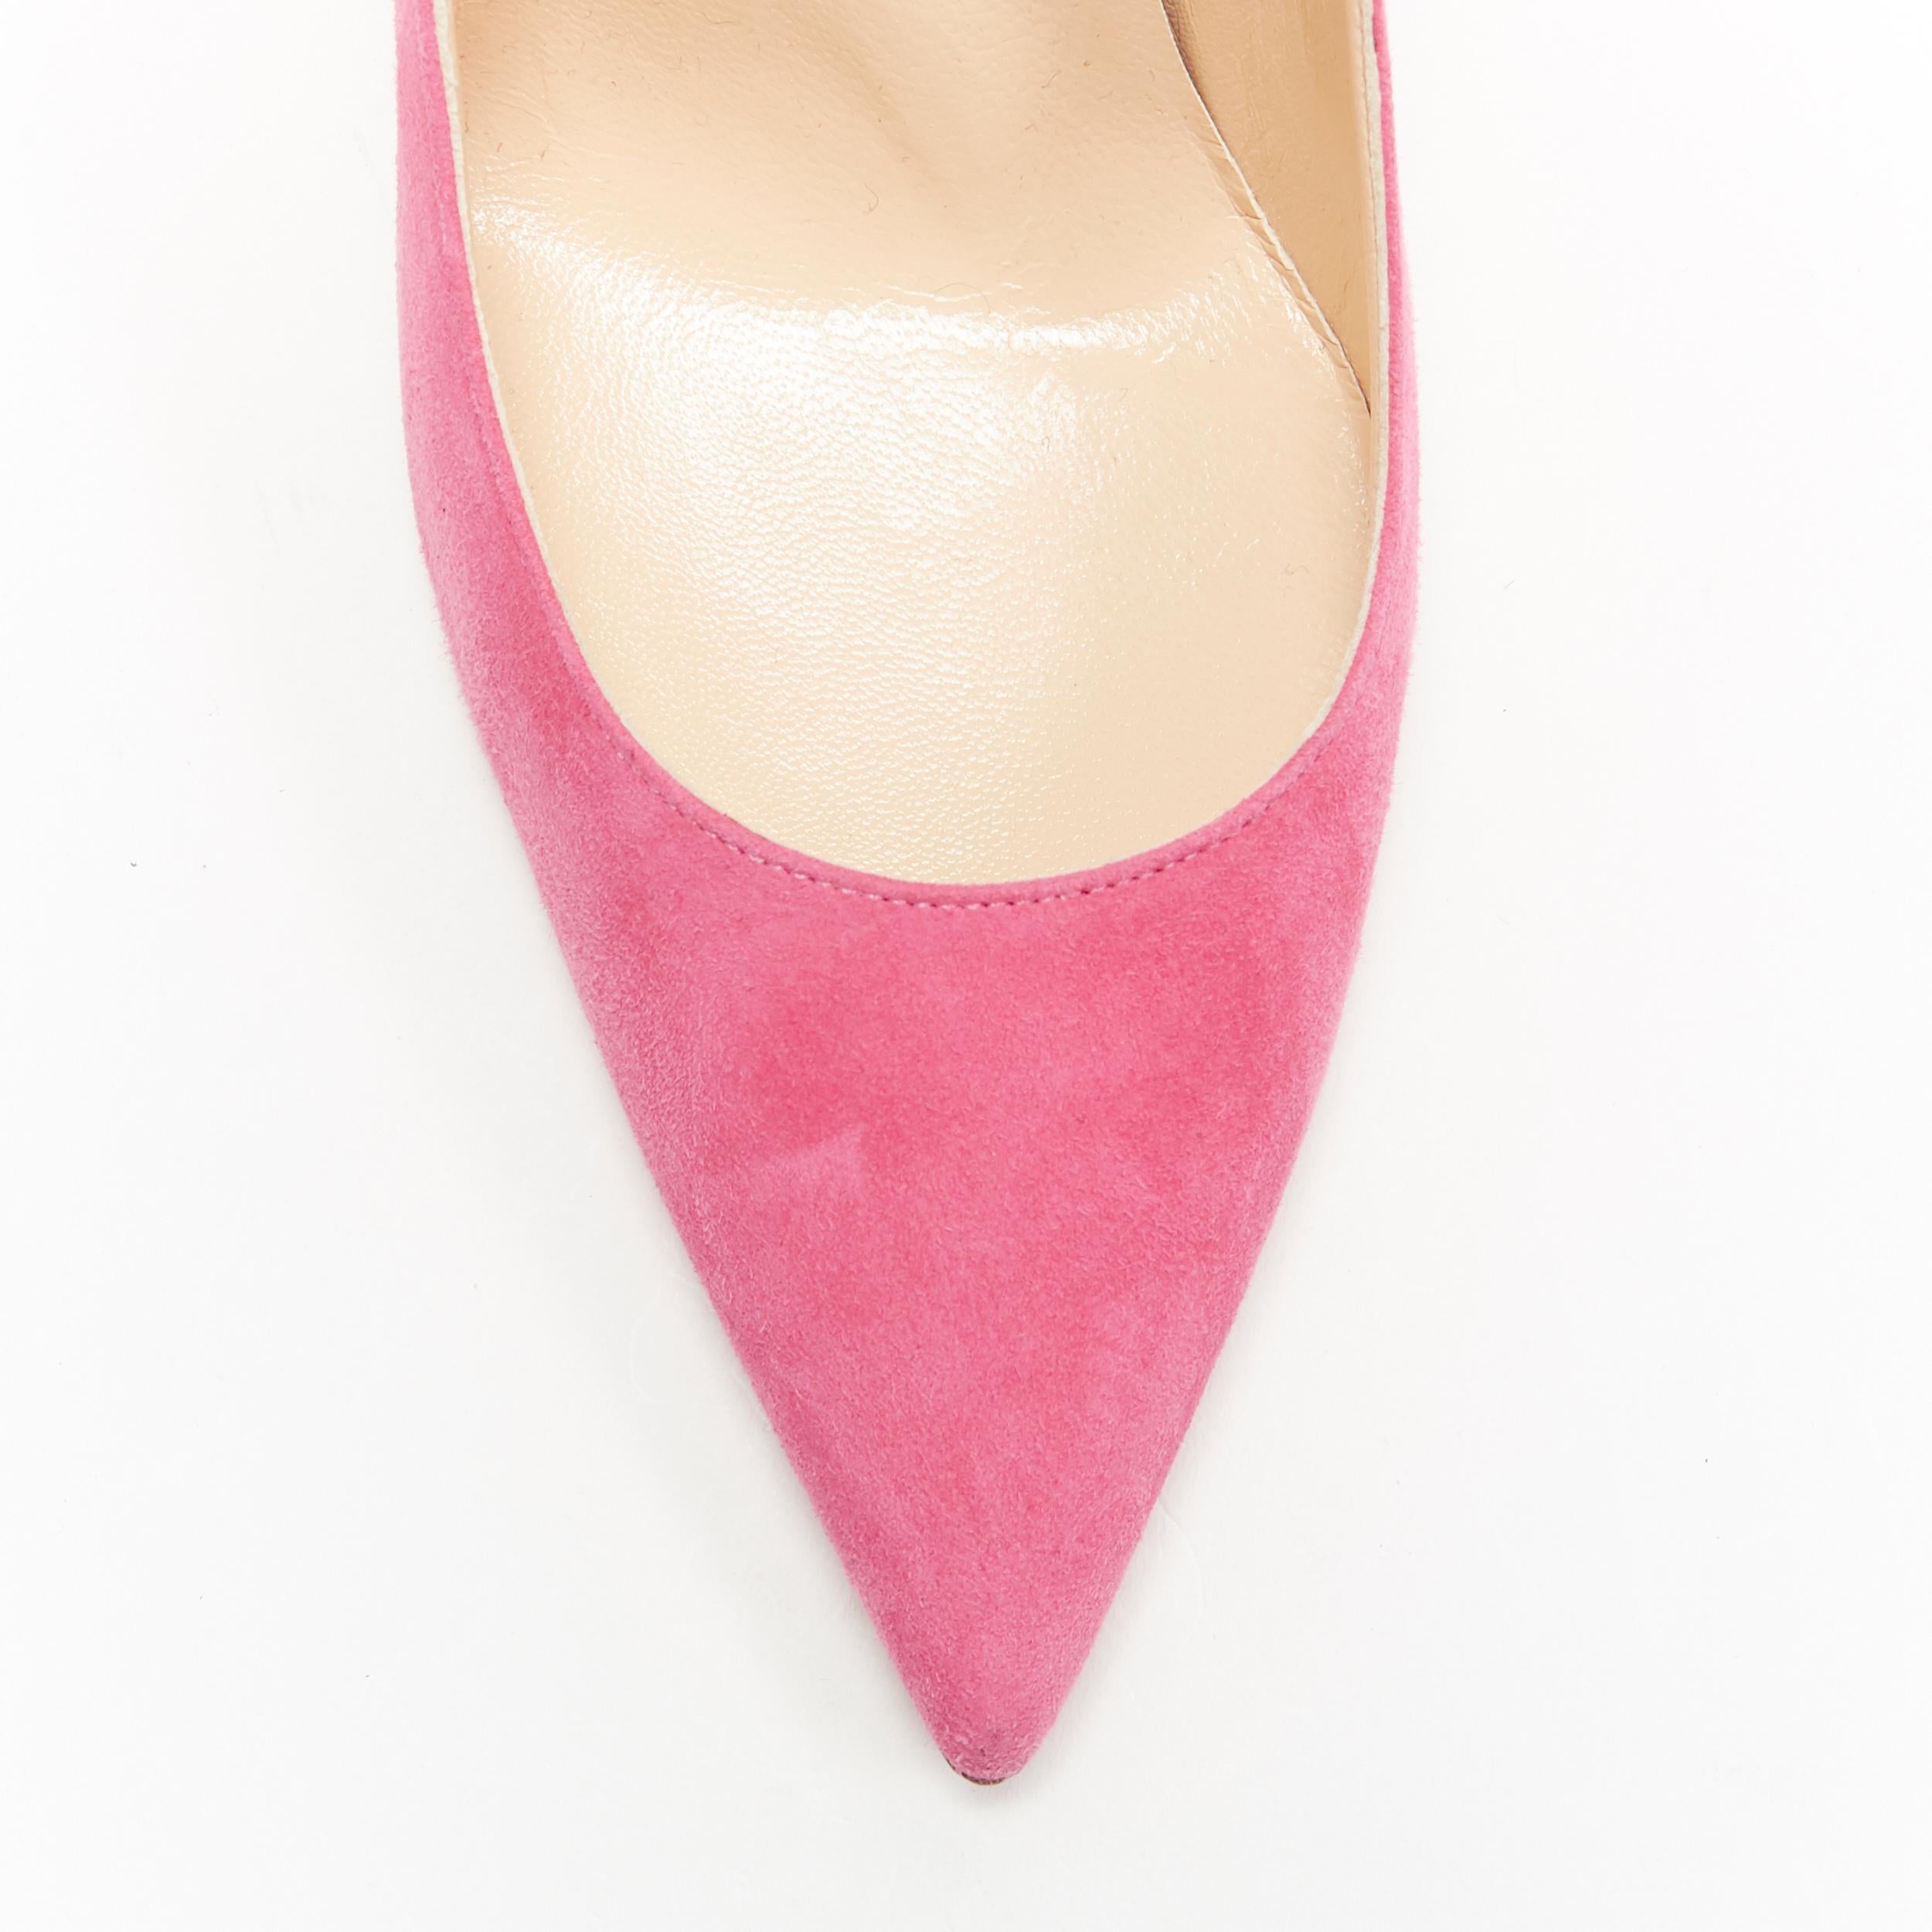 CHRISTIAN LOUBOUTIN pink suede leather pointy toe stiletto pigalle pump EU38 1